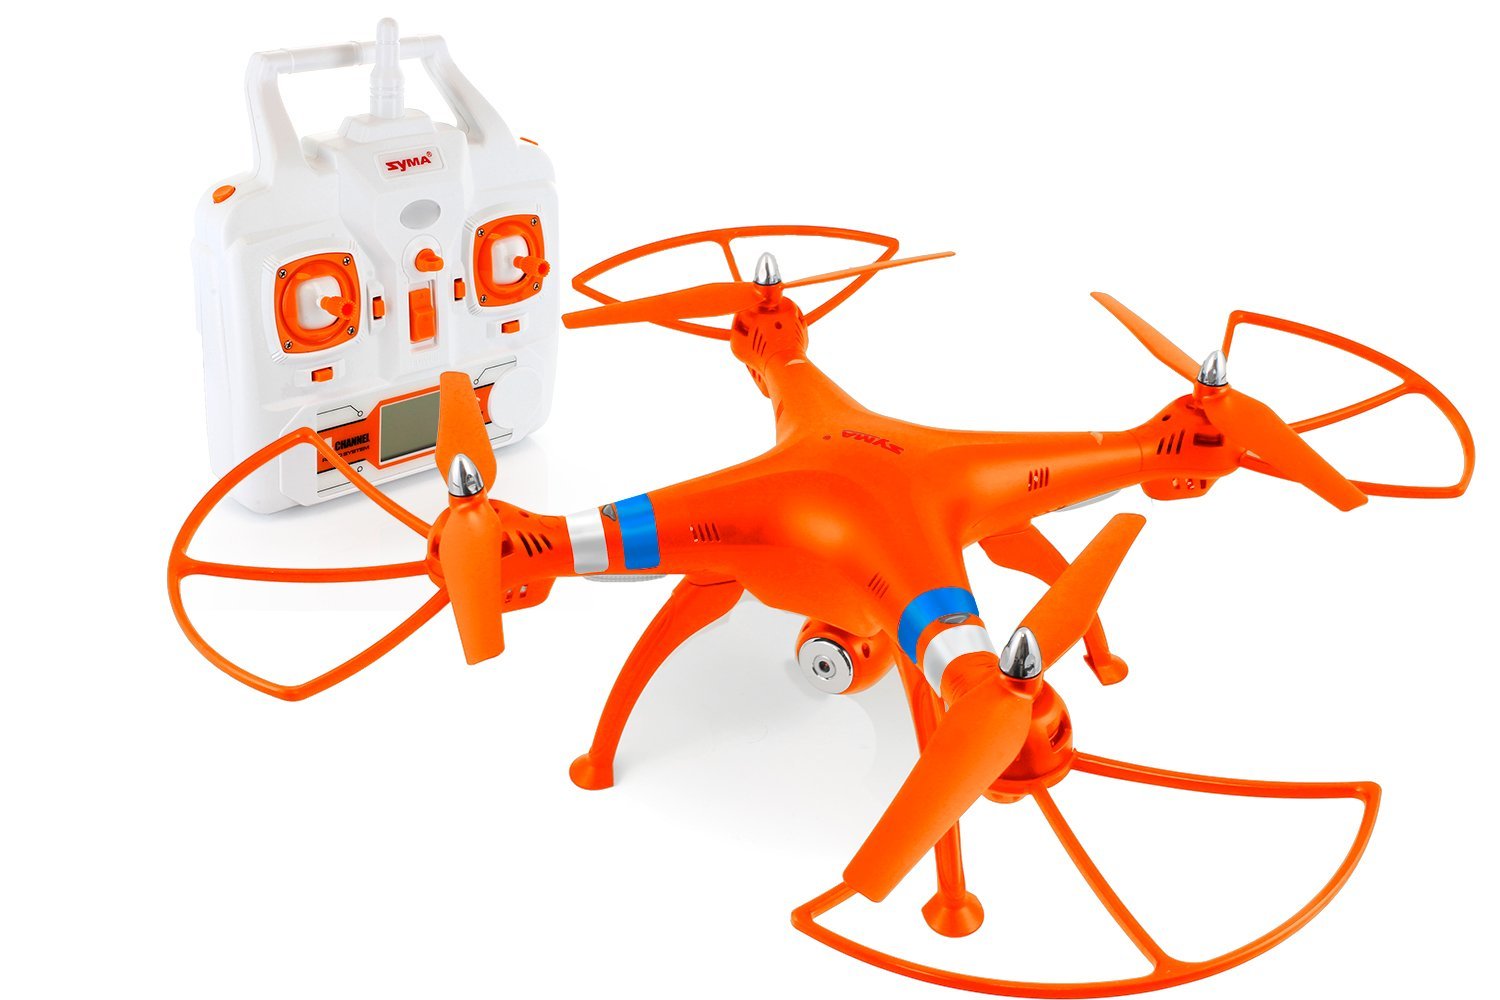 Syma X8C Venture with 2MP Wide Angle Camera 2.4G 4CH RC Quadcopter with Transmitter RTF (Orange)